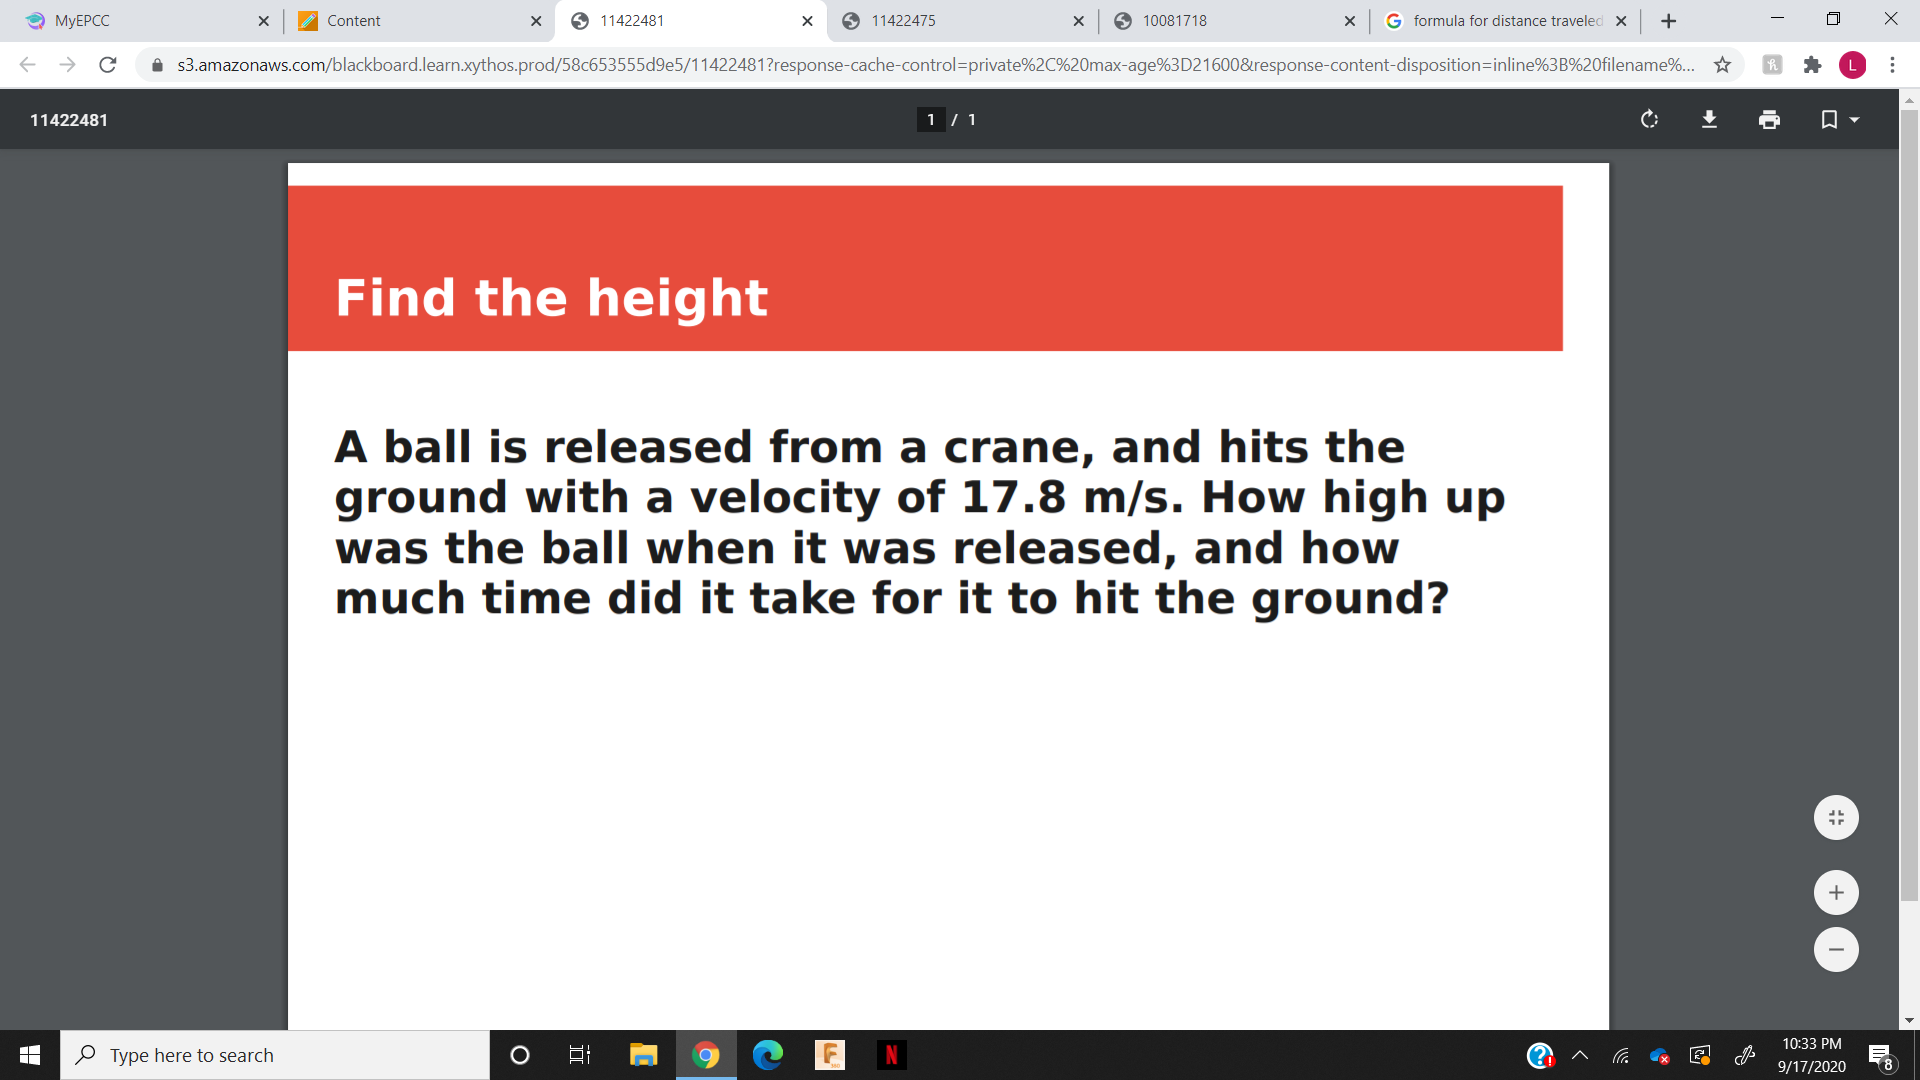 A ball is released from a crane, and hits the
ground with a velocity of 17.8 m/s. How high up
was the ball when it was released, and how
much time did it take for it to hit the ground?
